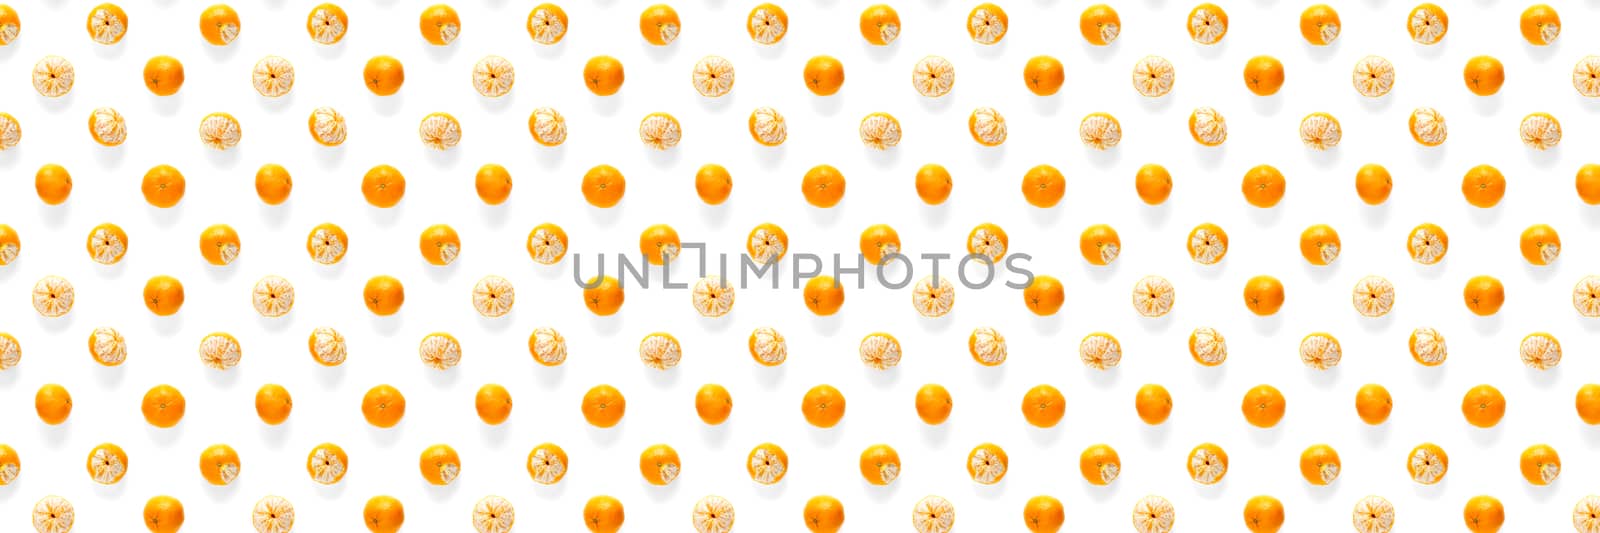 Isolated tangerine citrus collection background. Whole tangerines or mandarin orange fruits isolated on white background Banner not pattern